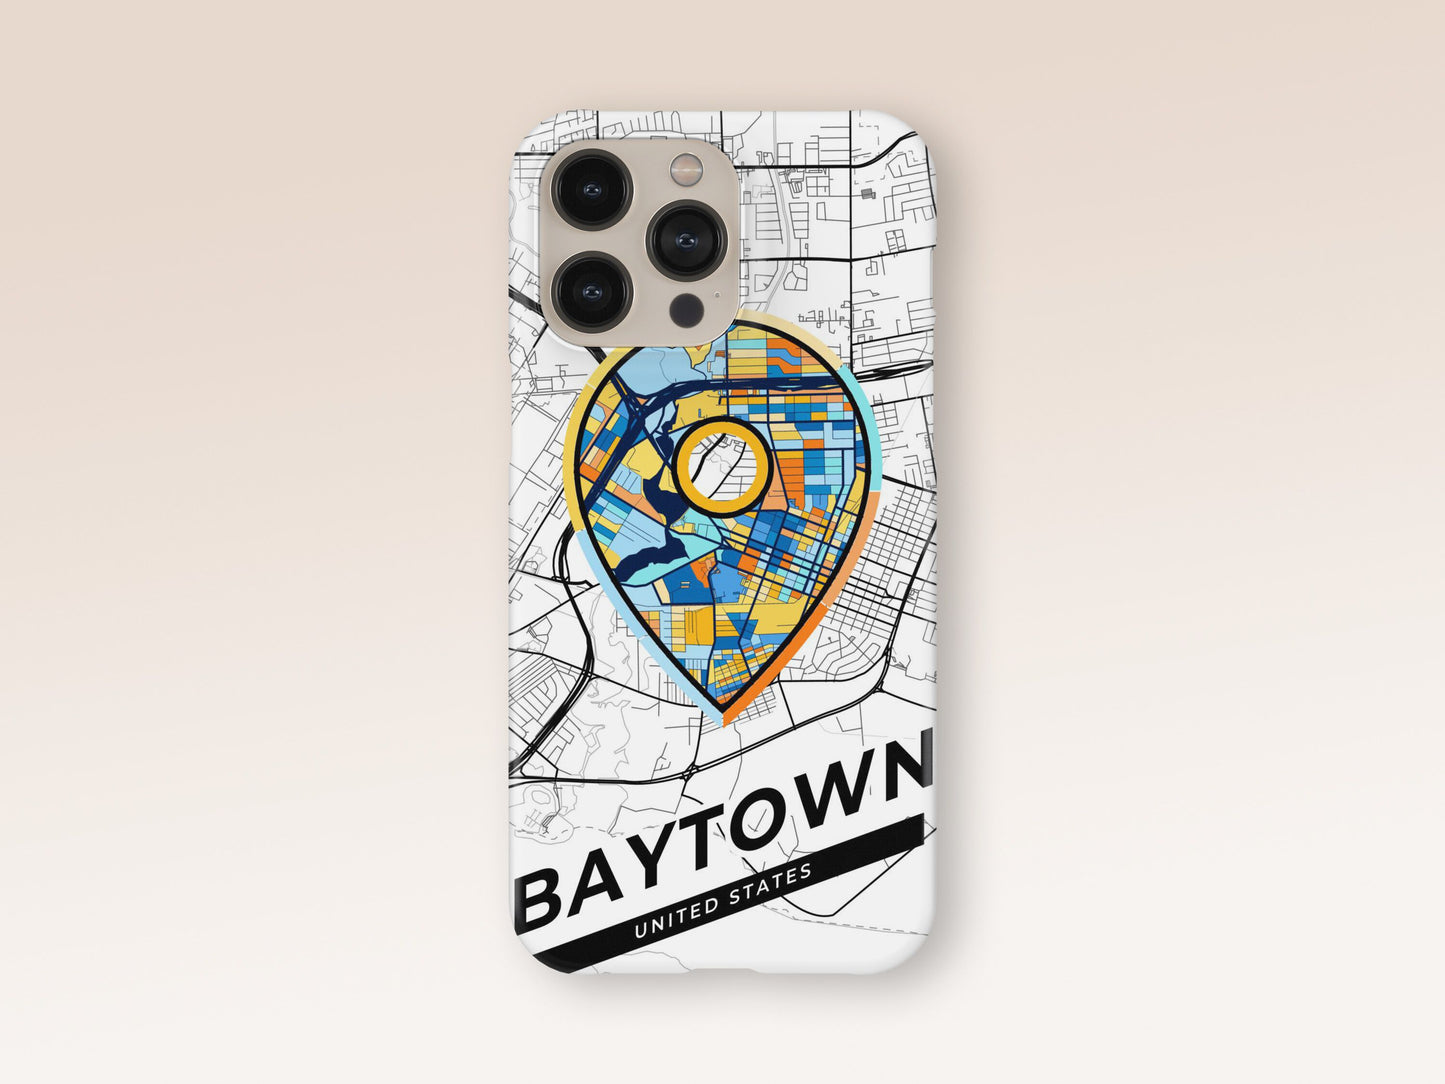 Baytown Texas slim phone case with colorful icon. Birthday, wedding or housewarming gift. Couple match cases. 1